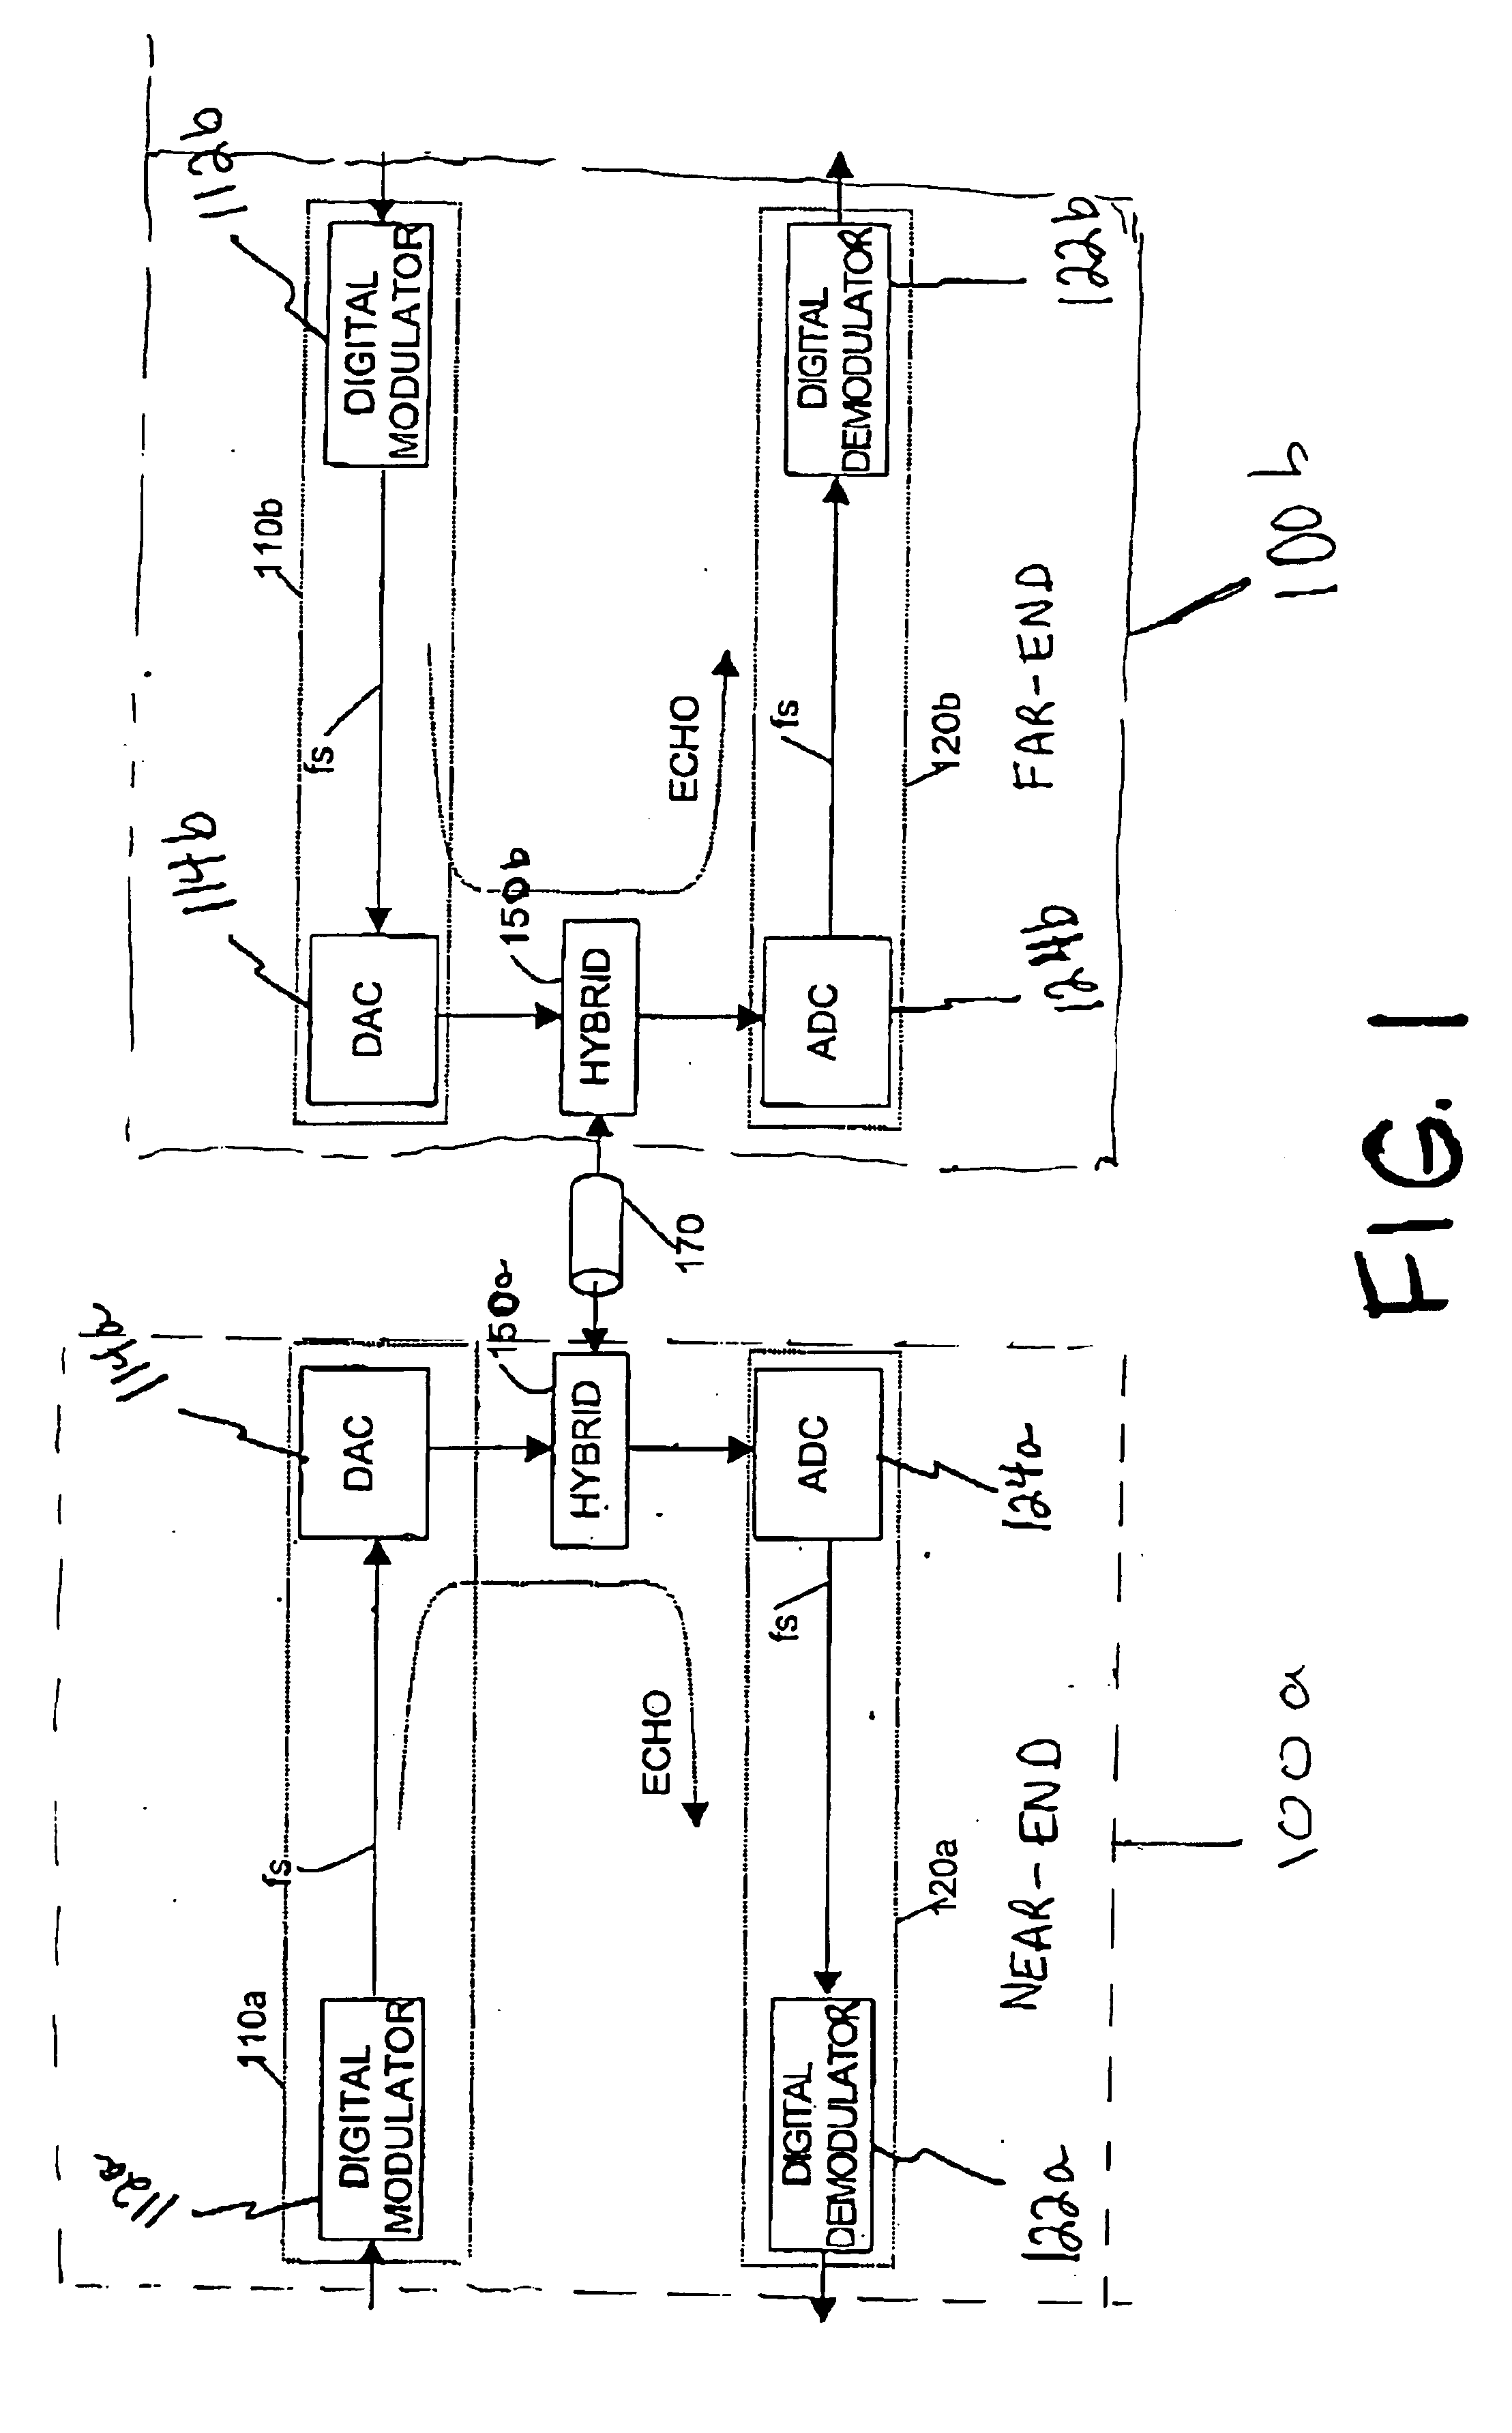 Method and apparatus for echo cancellation in an asymmetric communication system